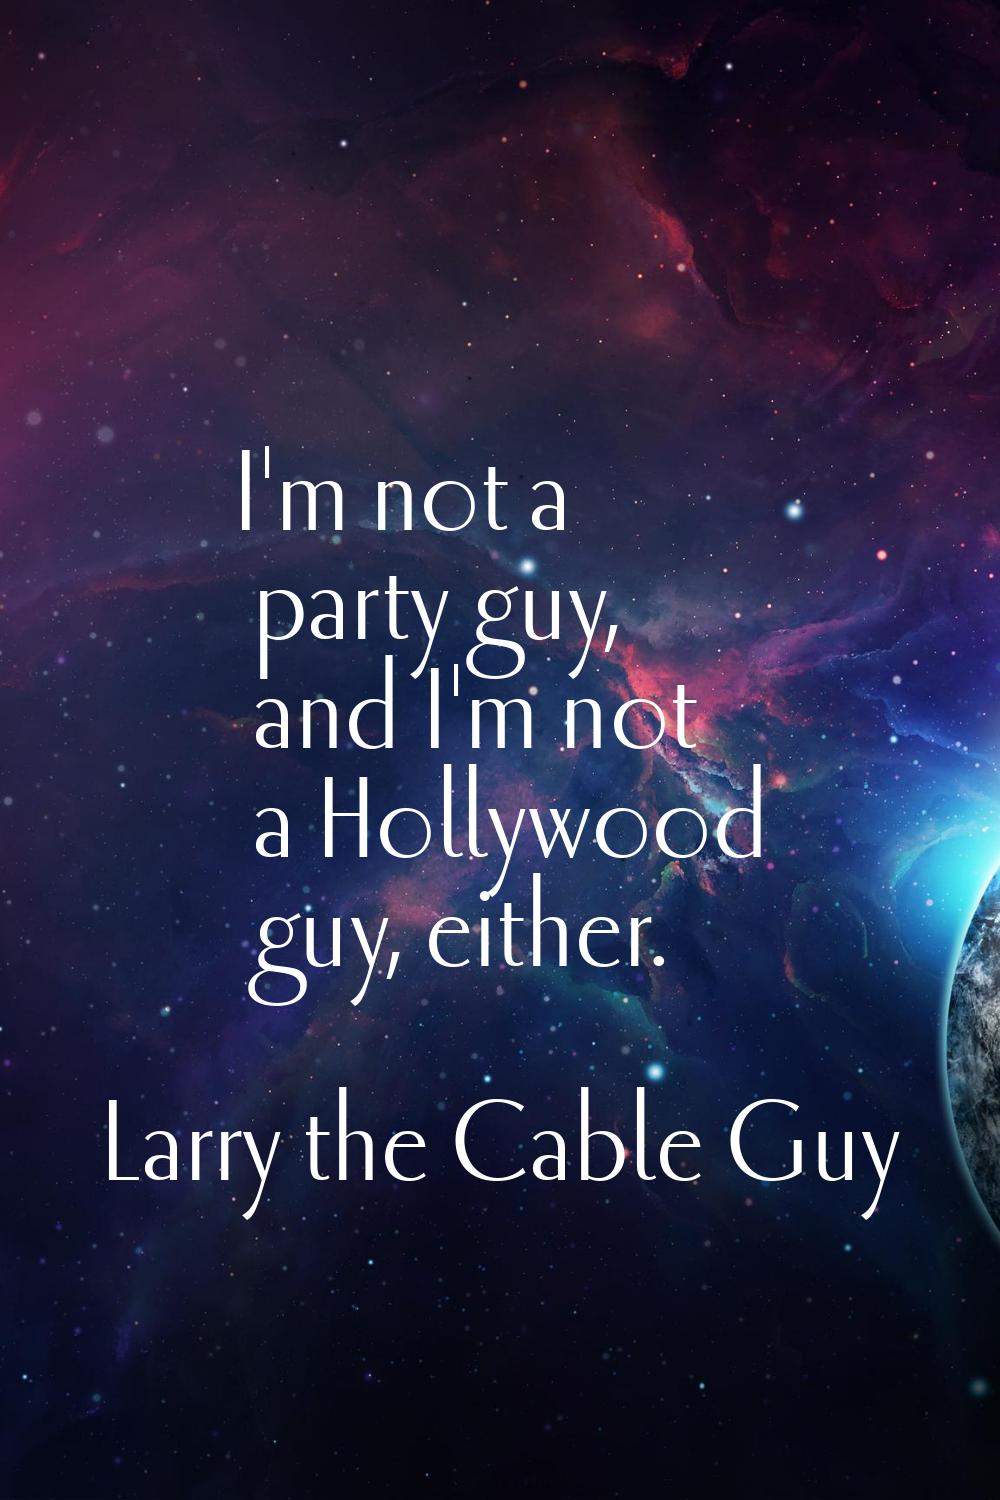 I'm not a party guy, and I'm not a Hollywood guy, either.